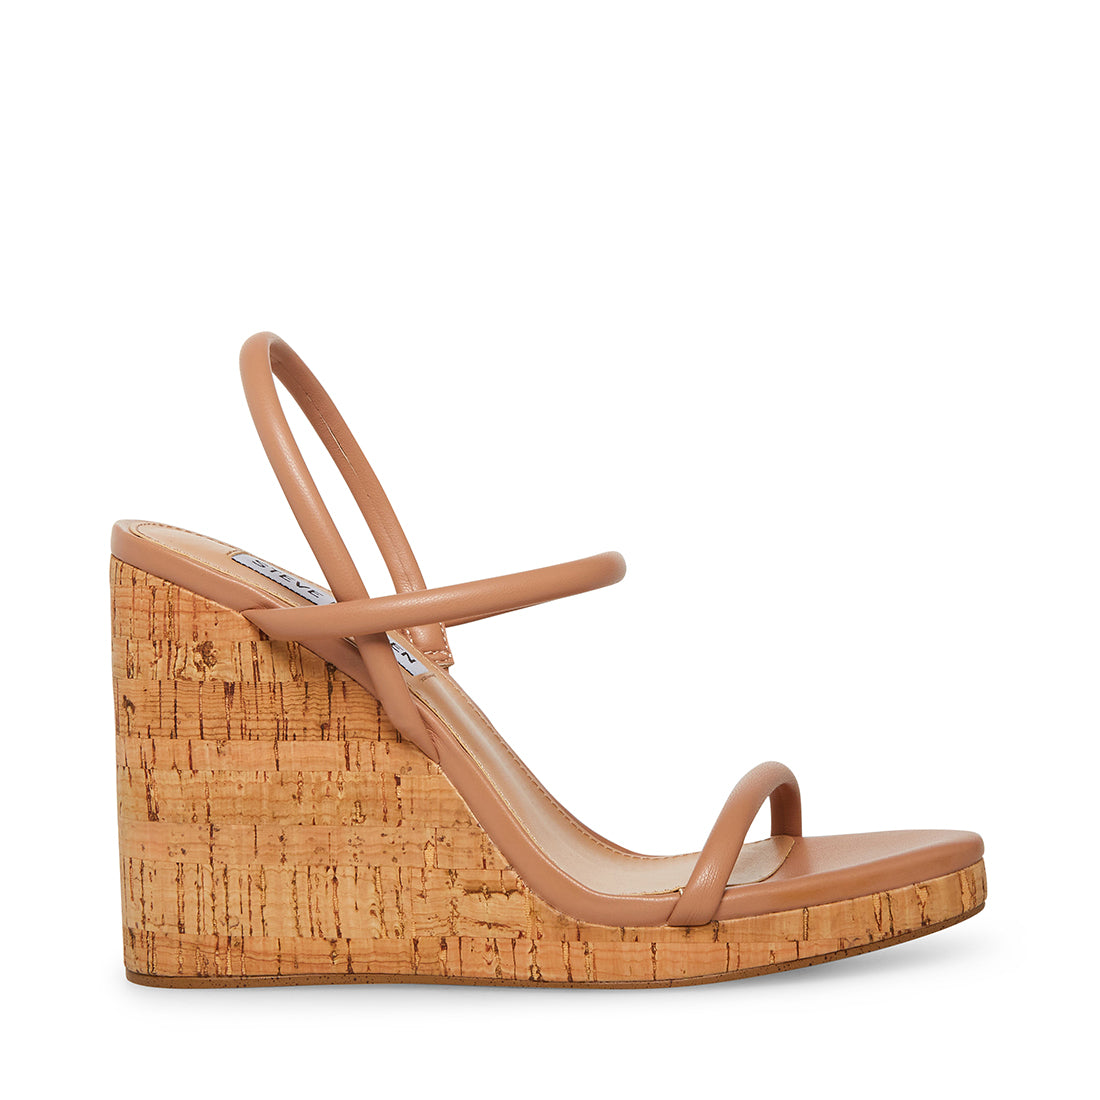 Circunferencia Será dignidad Women's Wedges | Designer Wedges for Women from Steve Madden